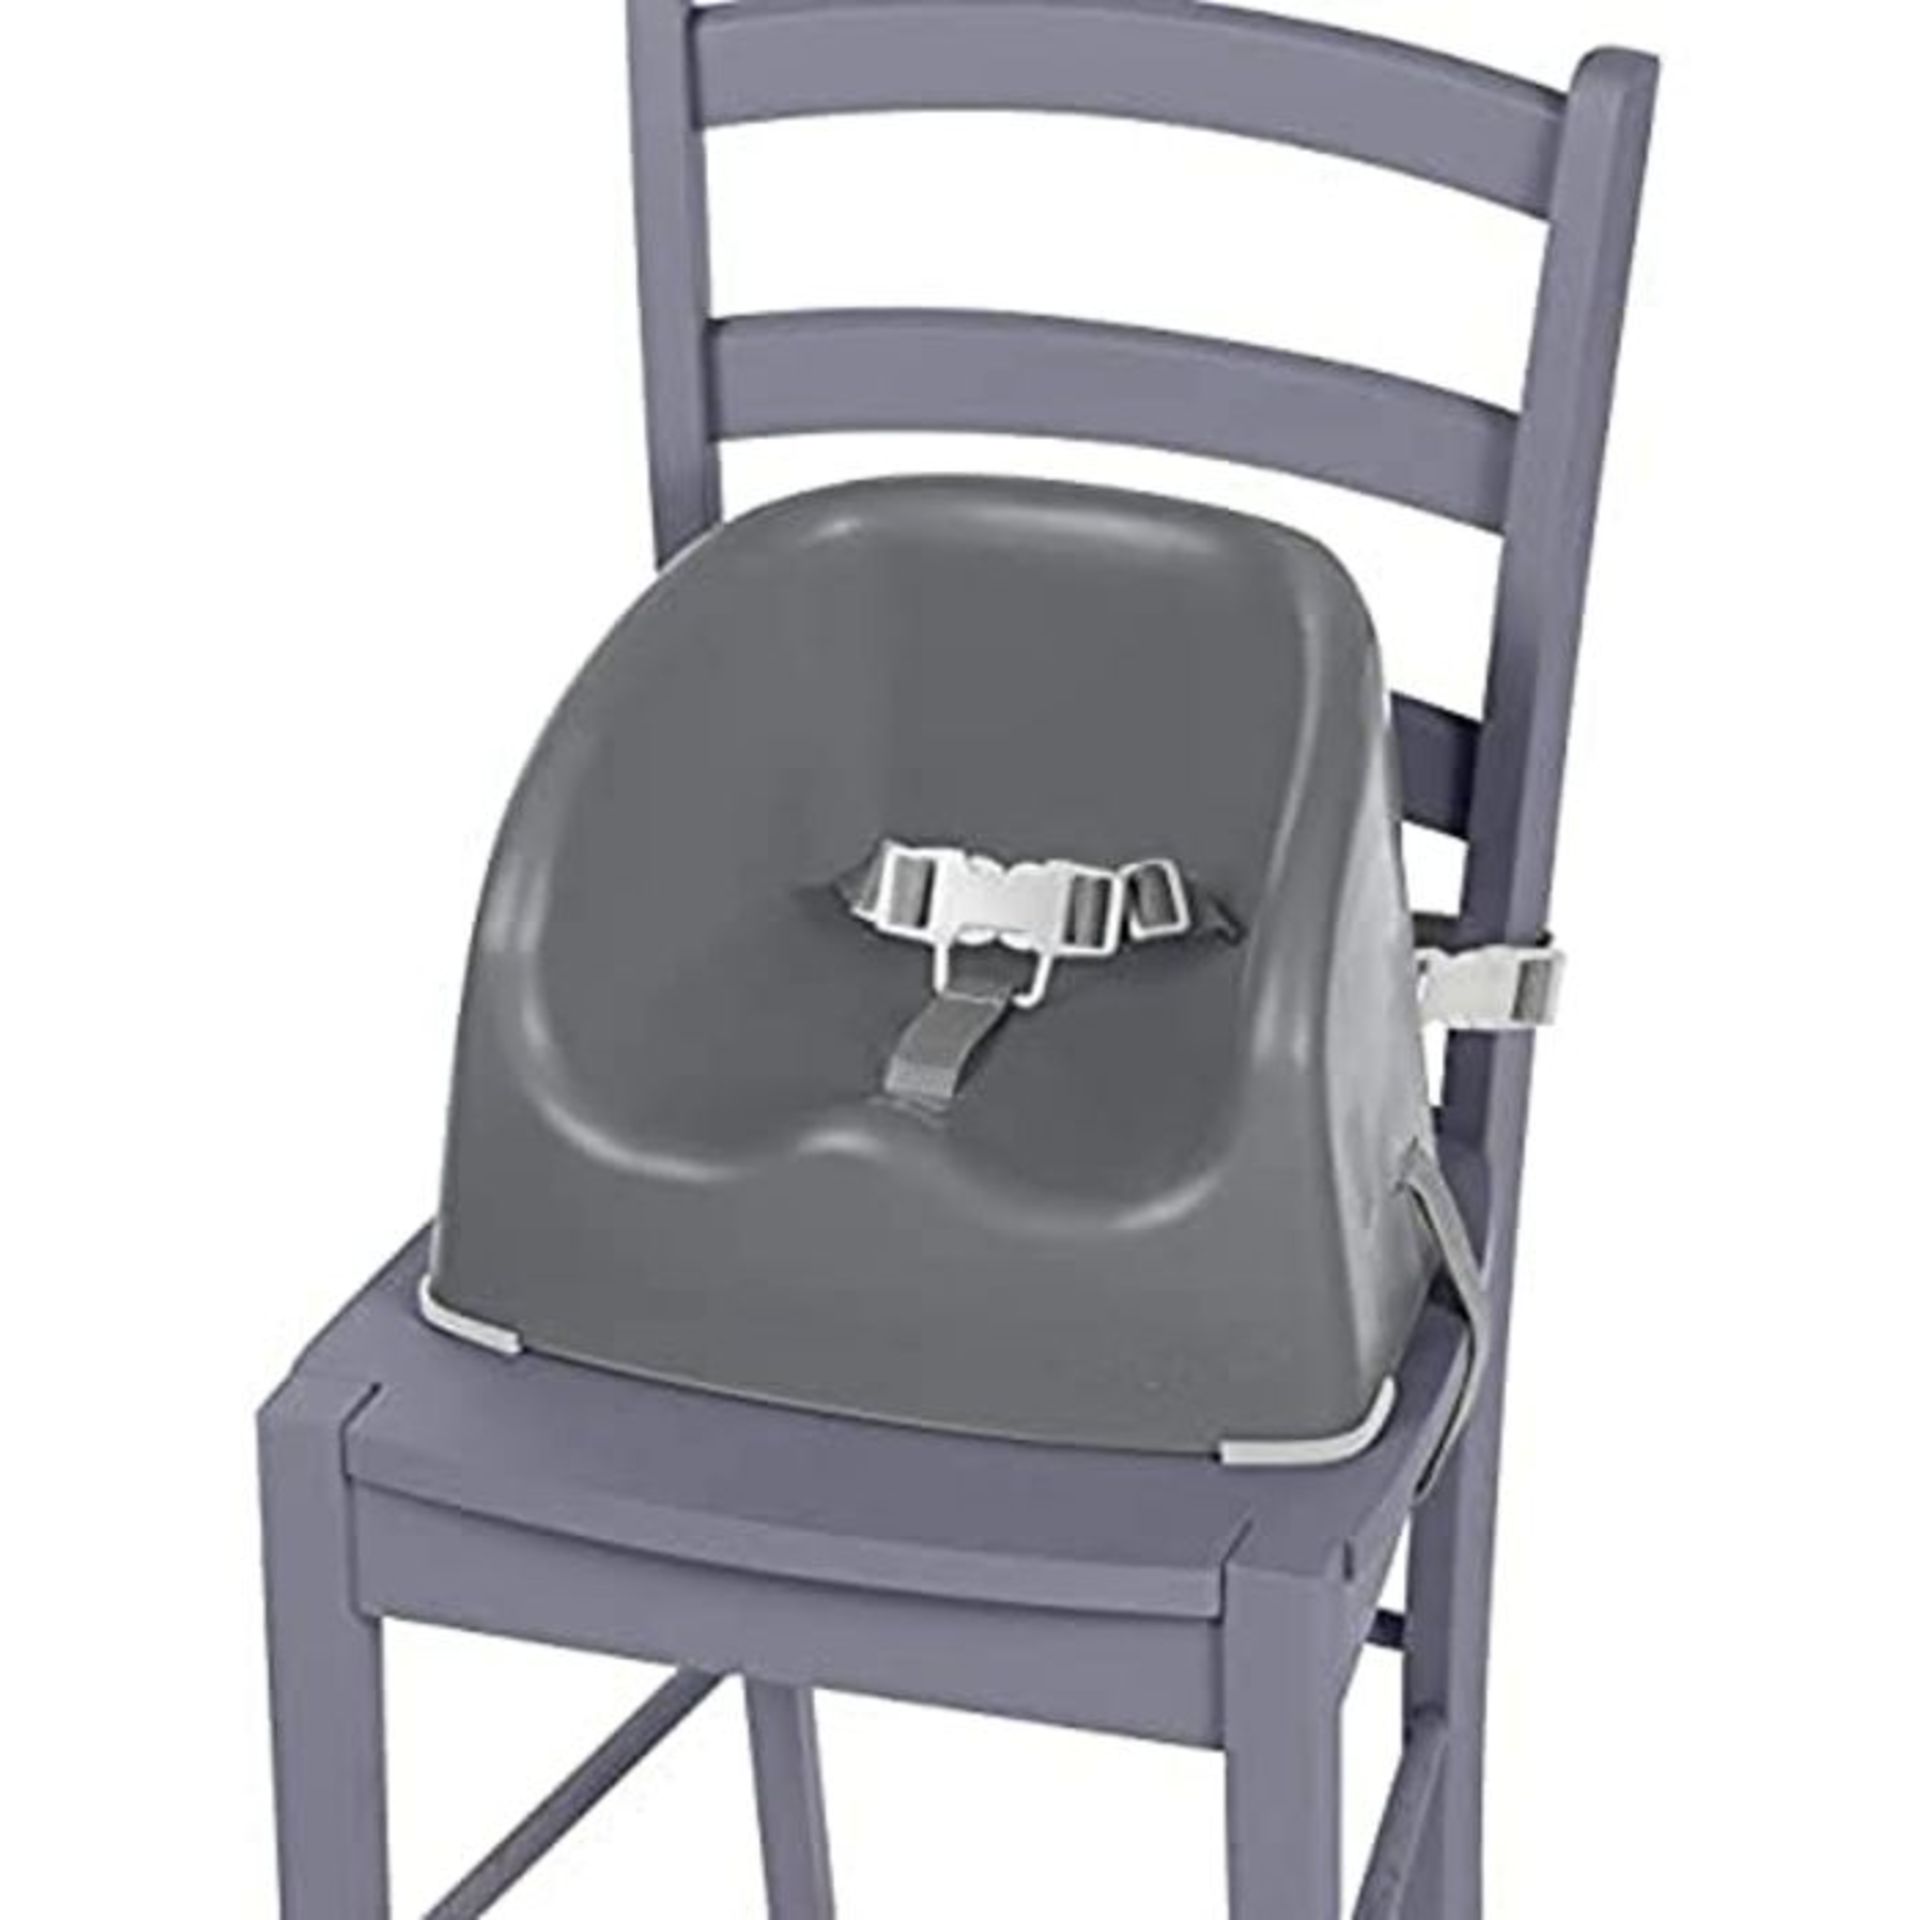 Safety 1st Essential Booster for Dining Chairs, Child Feeding seat for Table, Portable